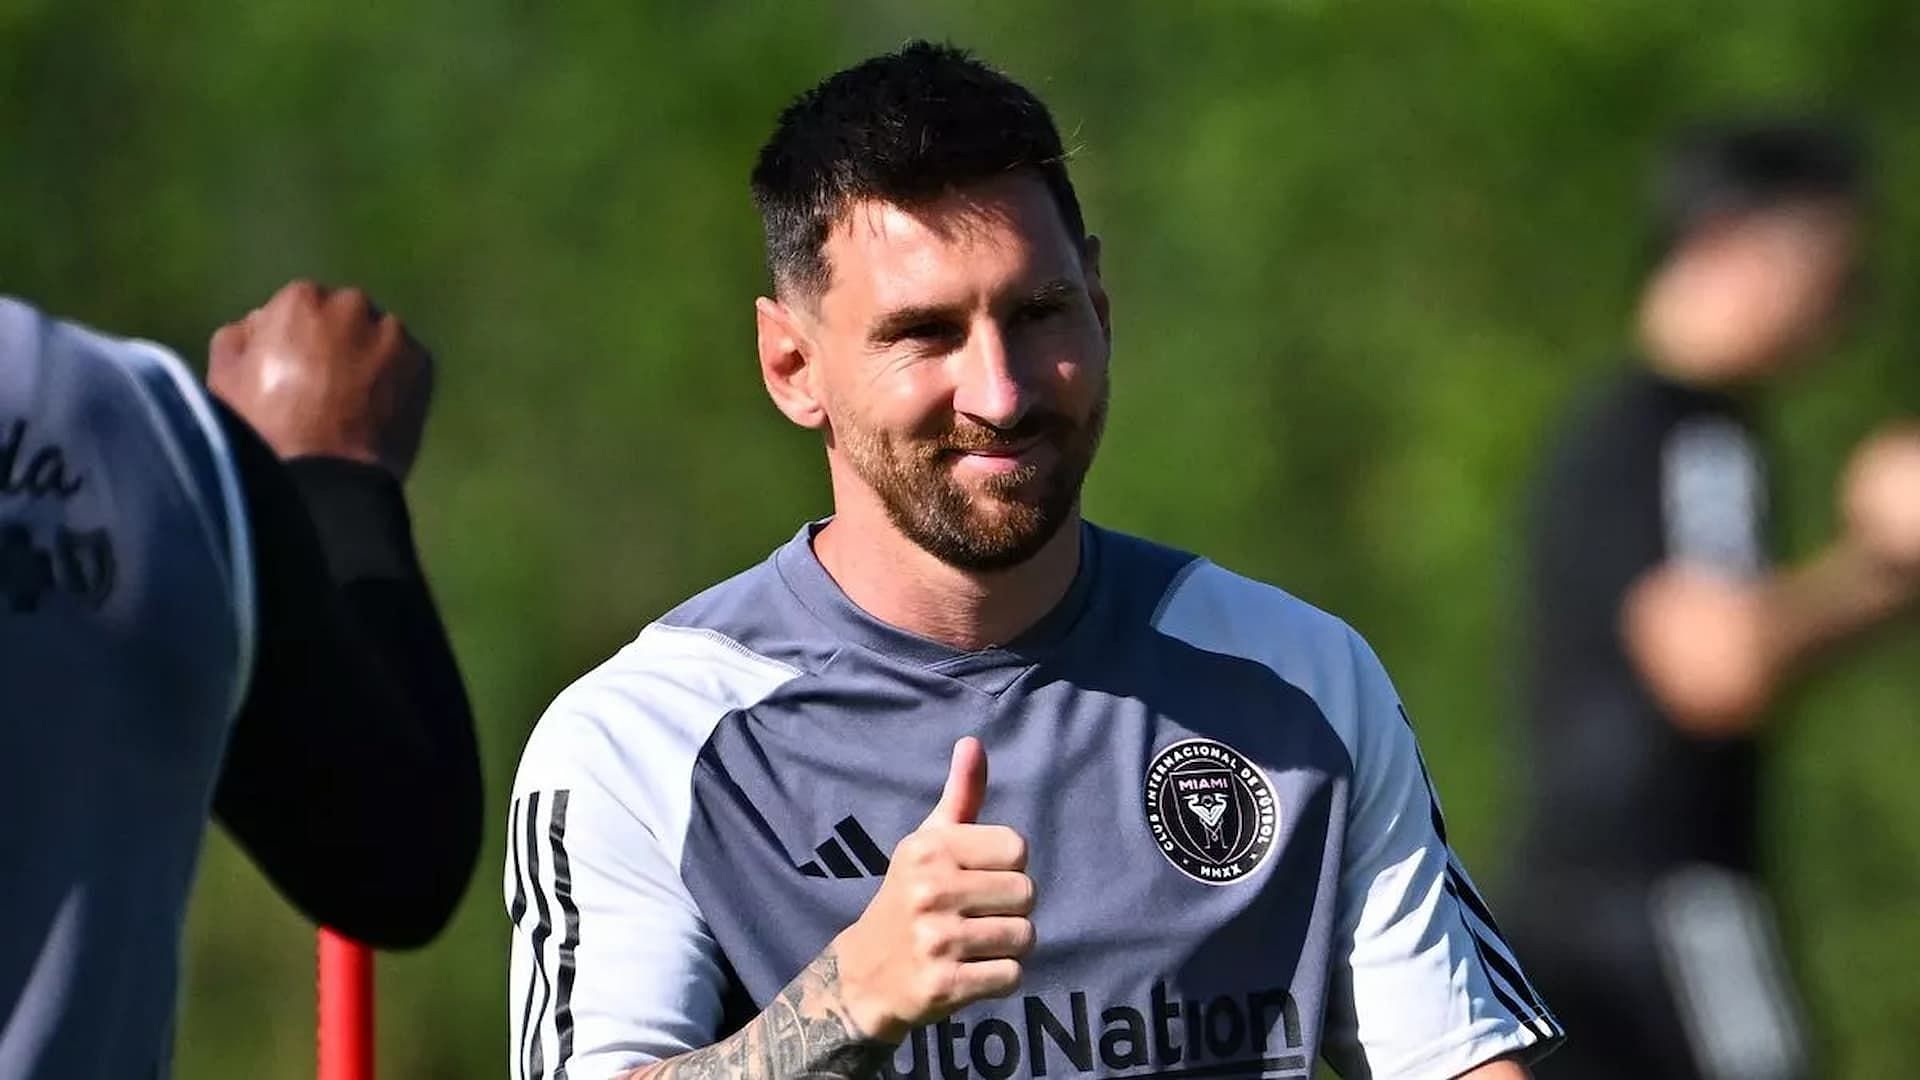 Messi on the training ground at Miami CF (Image via Getty)